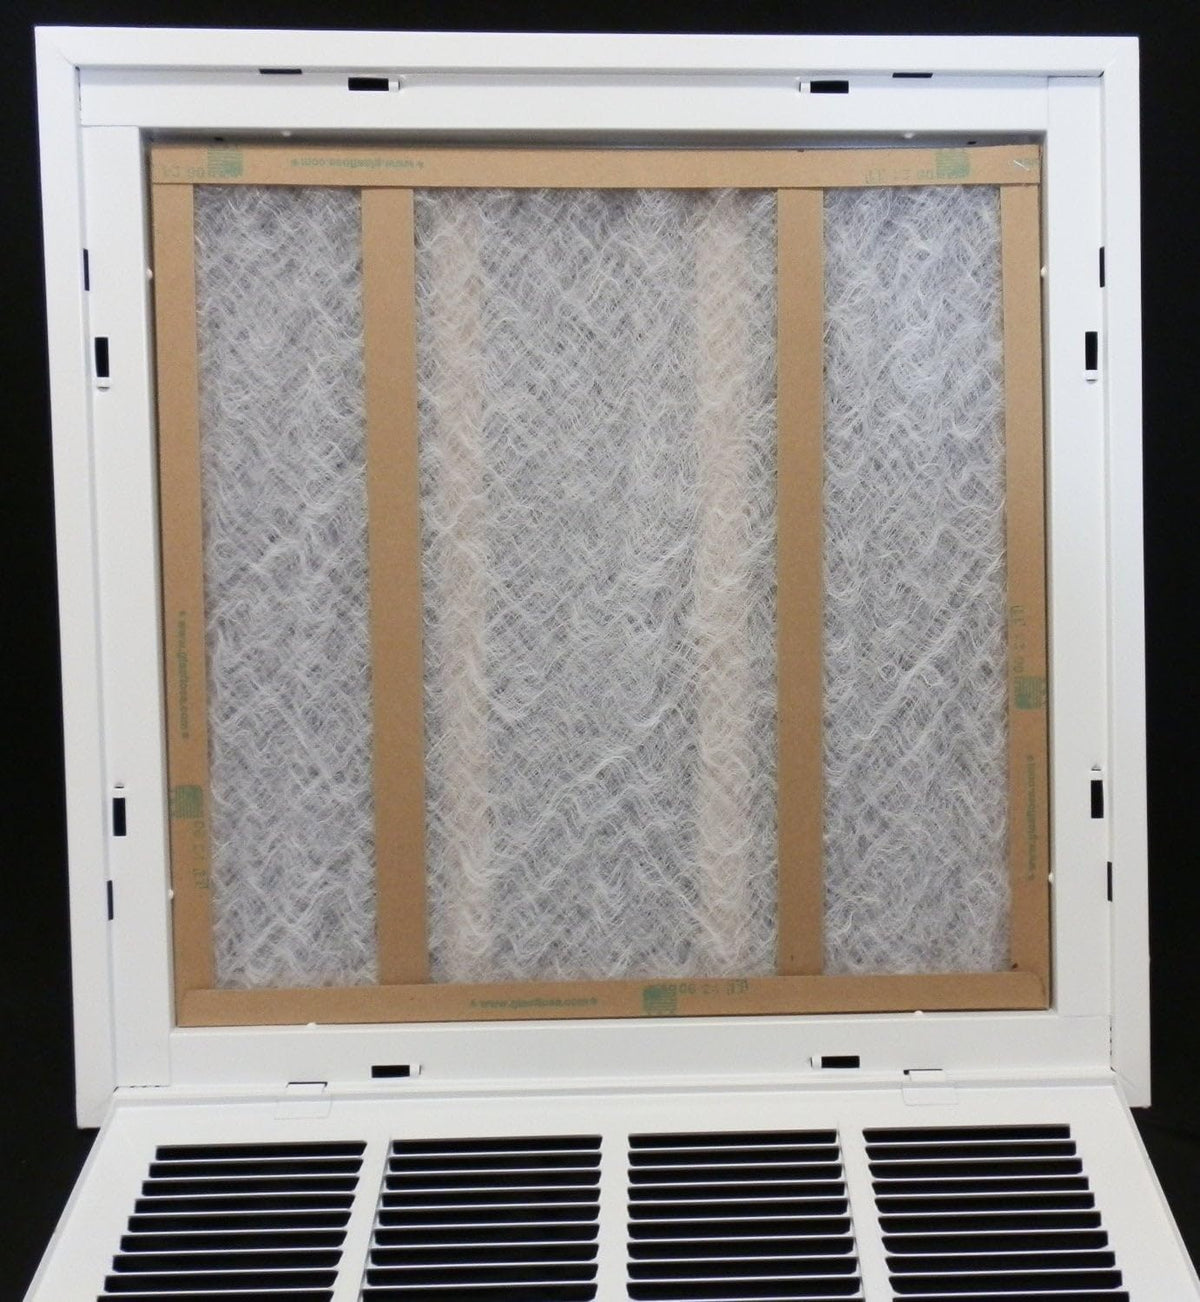 20&quot; X 14&quot; Steel Return Air Filter Grille for 1&quot; Filter - Removable Frame - [Outer Dimensions: 22 5/8&quot; X 16 5/8&quot;]